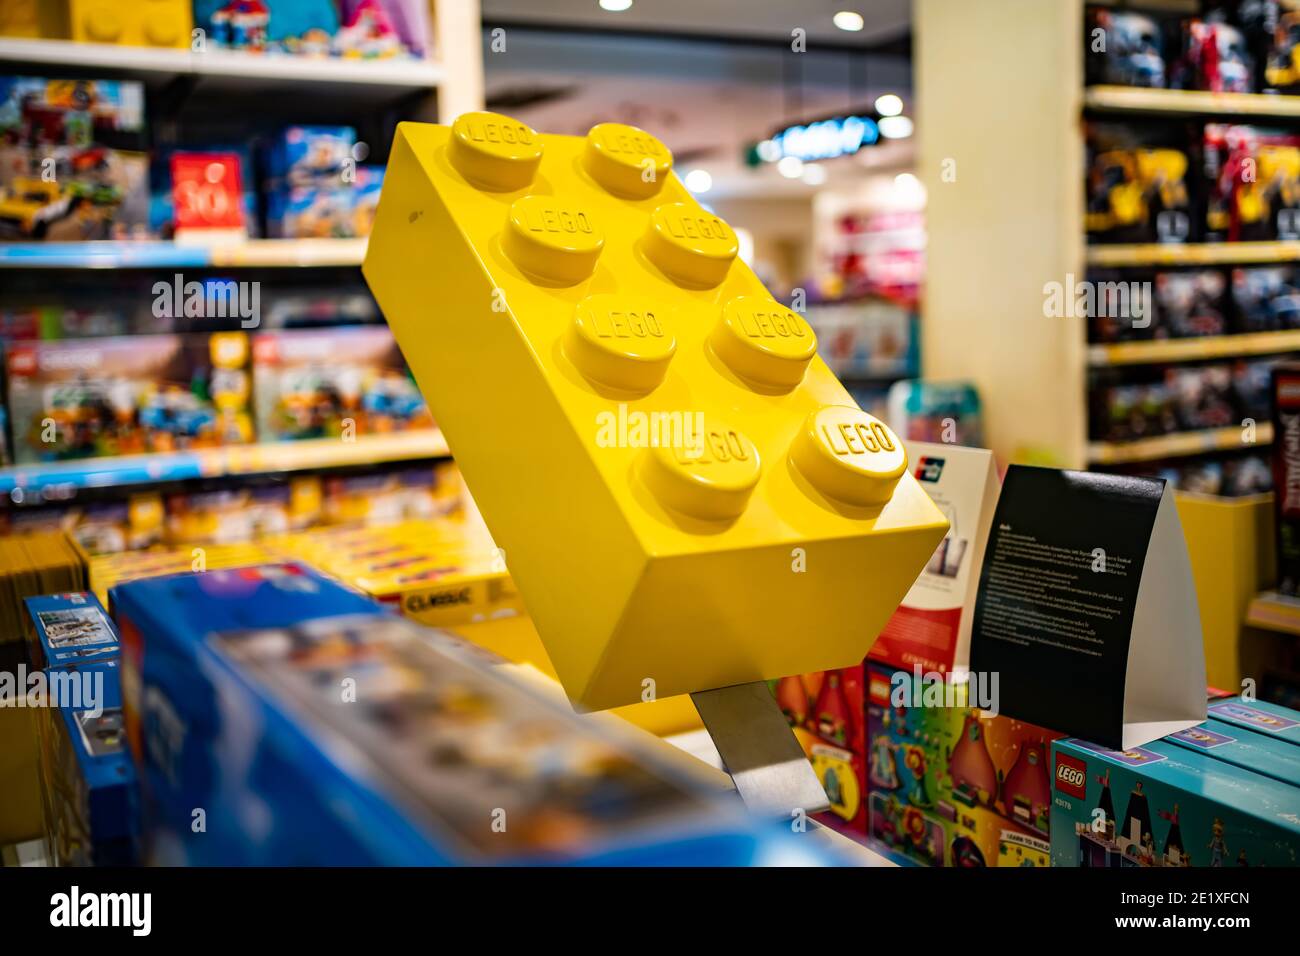 Bangkok, Thailand - January 9, 2021 : A giant yellow Lego brick on a shelf in a toy department in a department store. Stock Photo